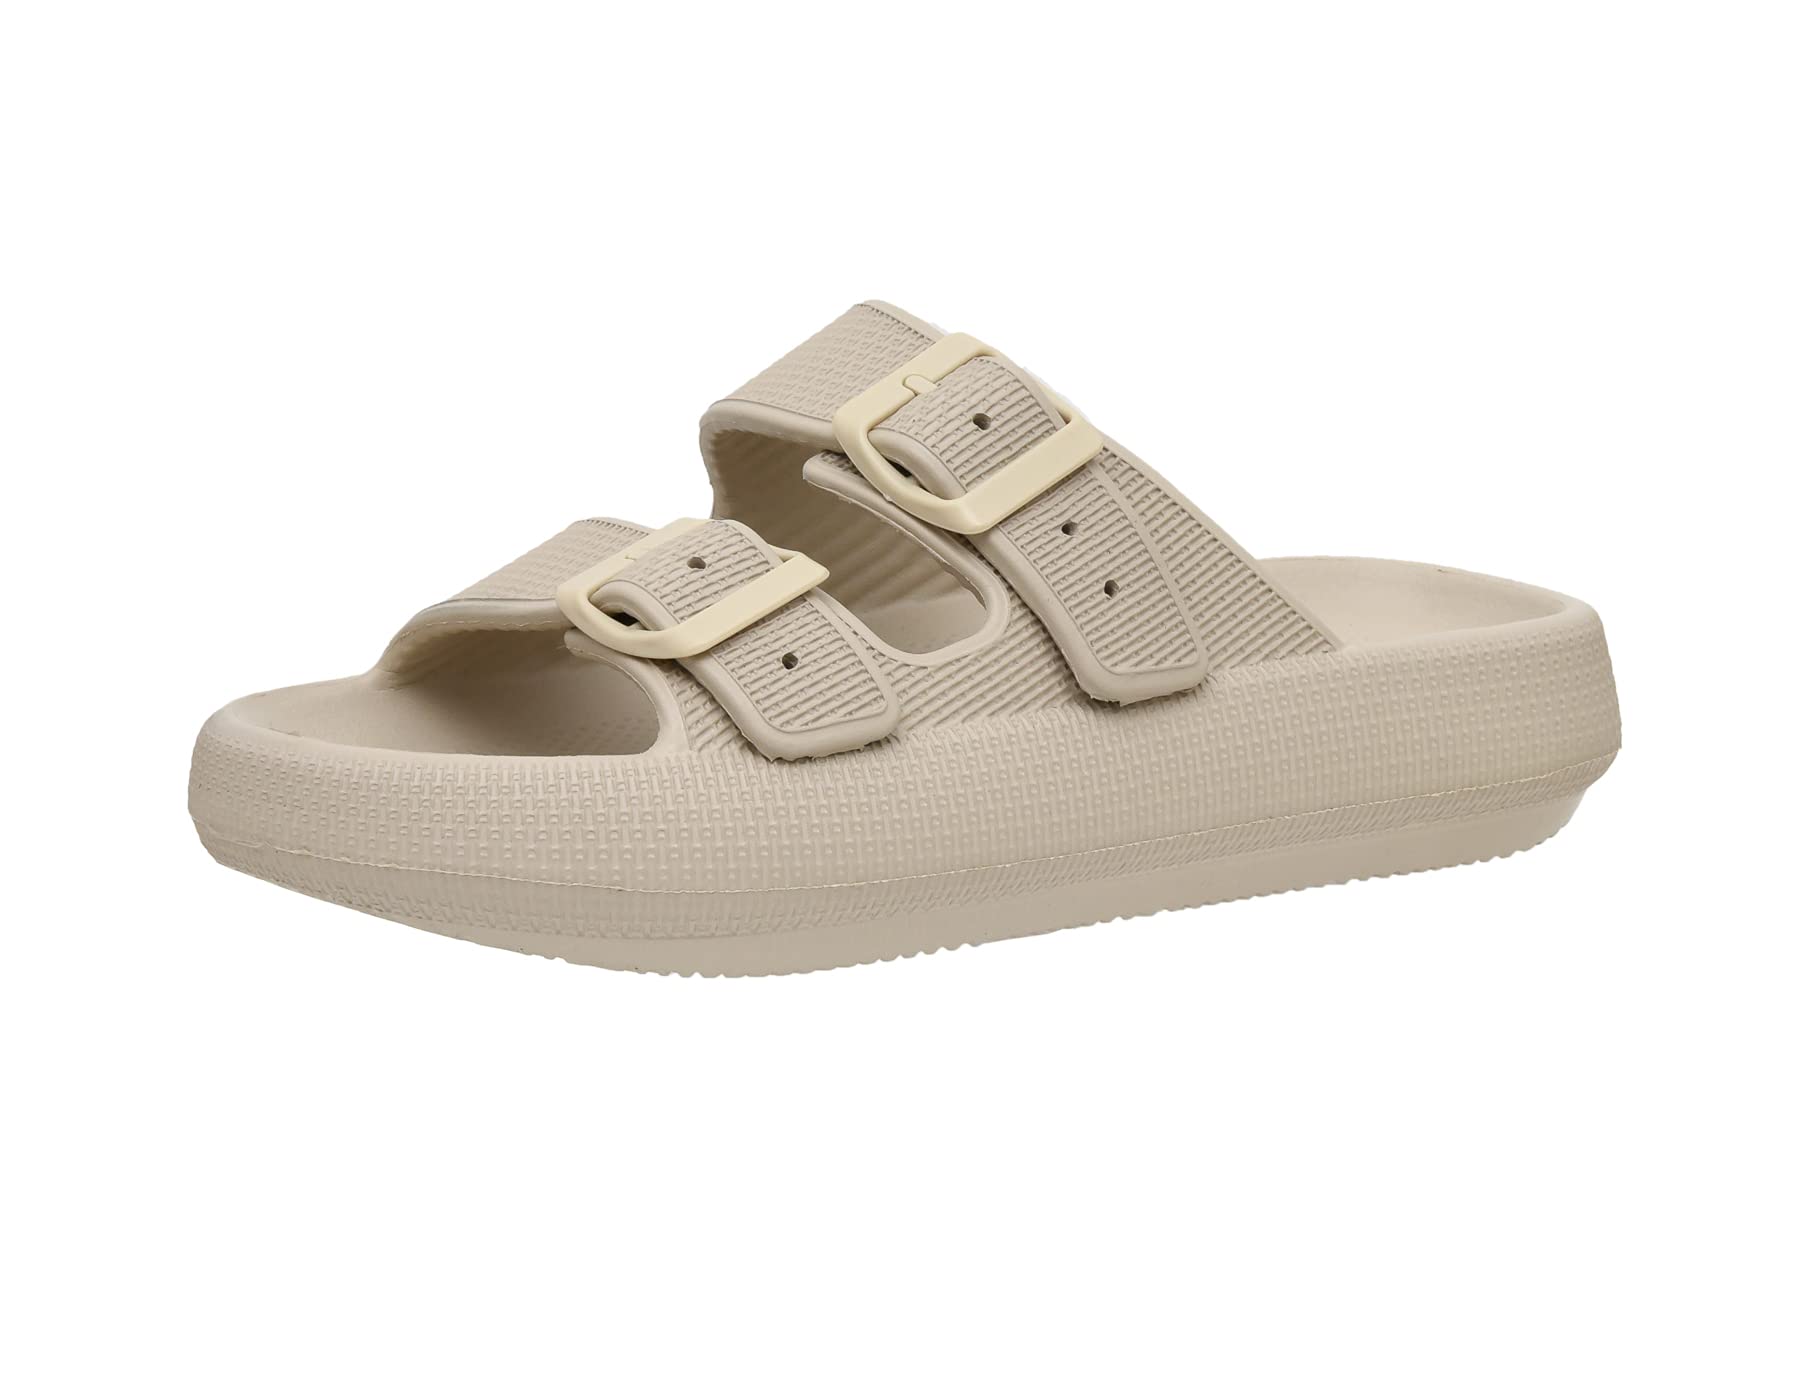 cUSHIONAIRE Womens Fame recovery cloud slide with comfort, Khaki 12